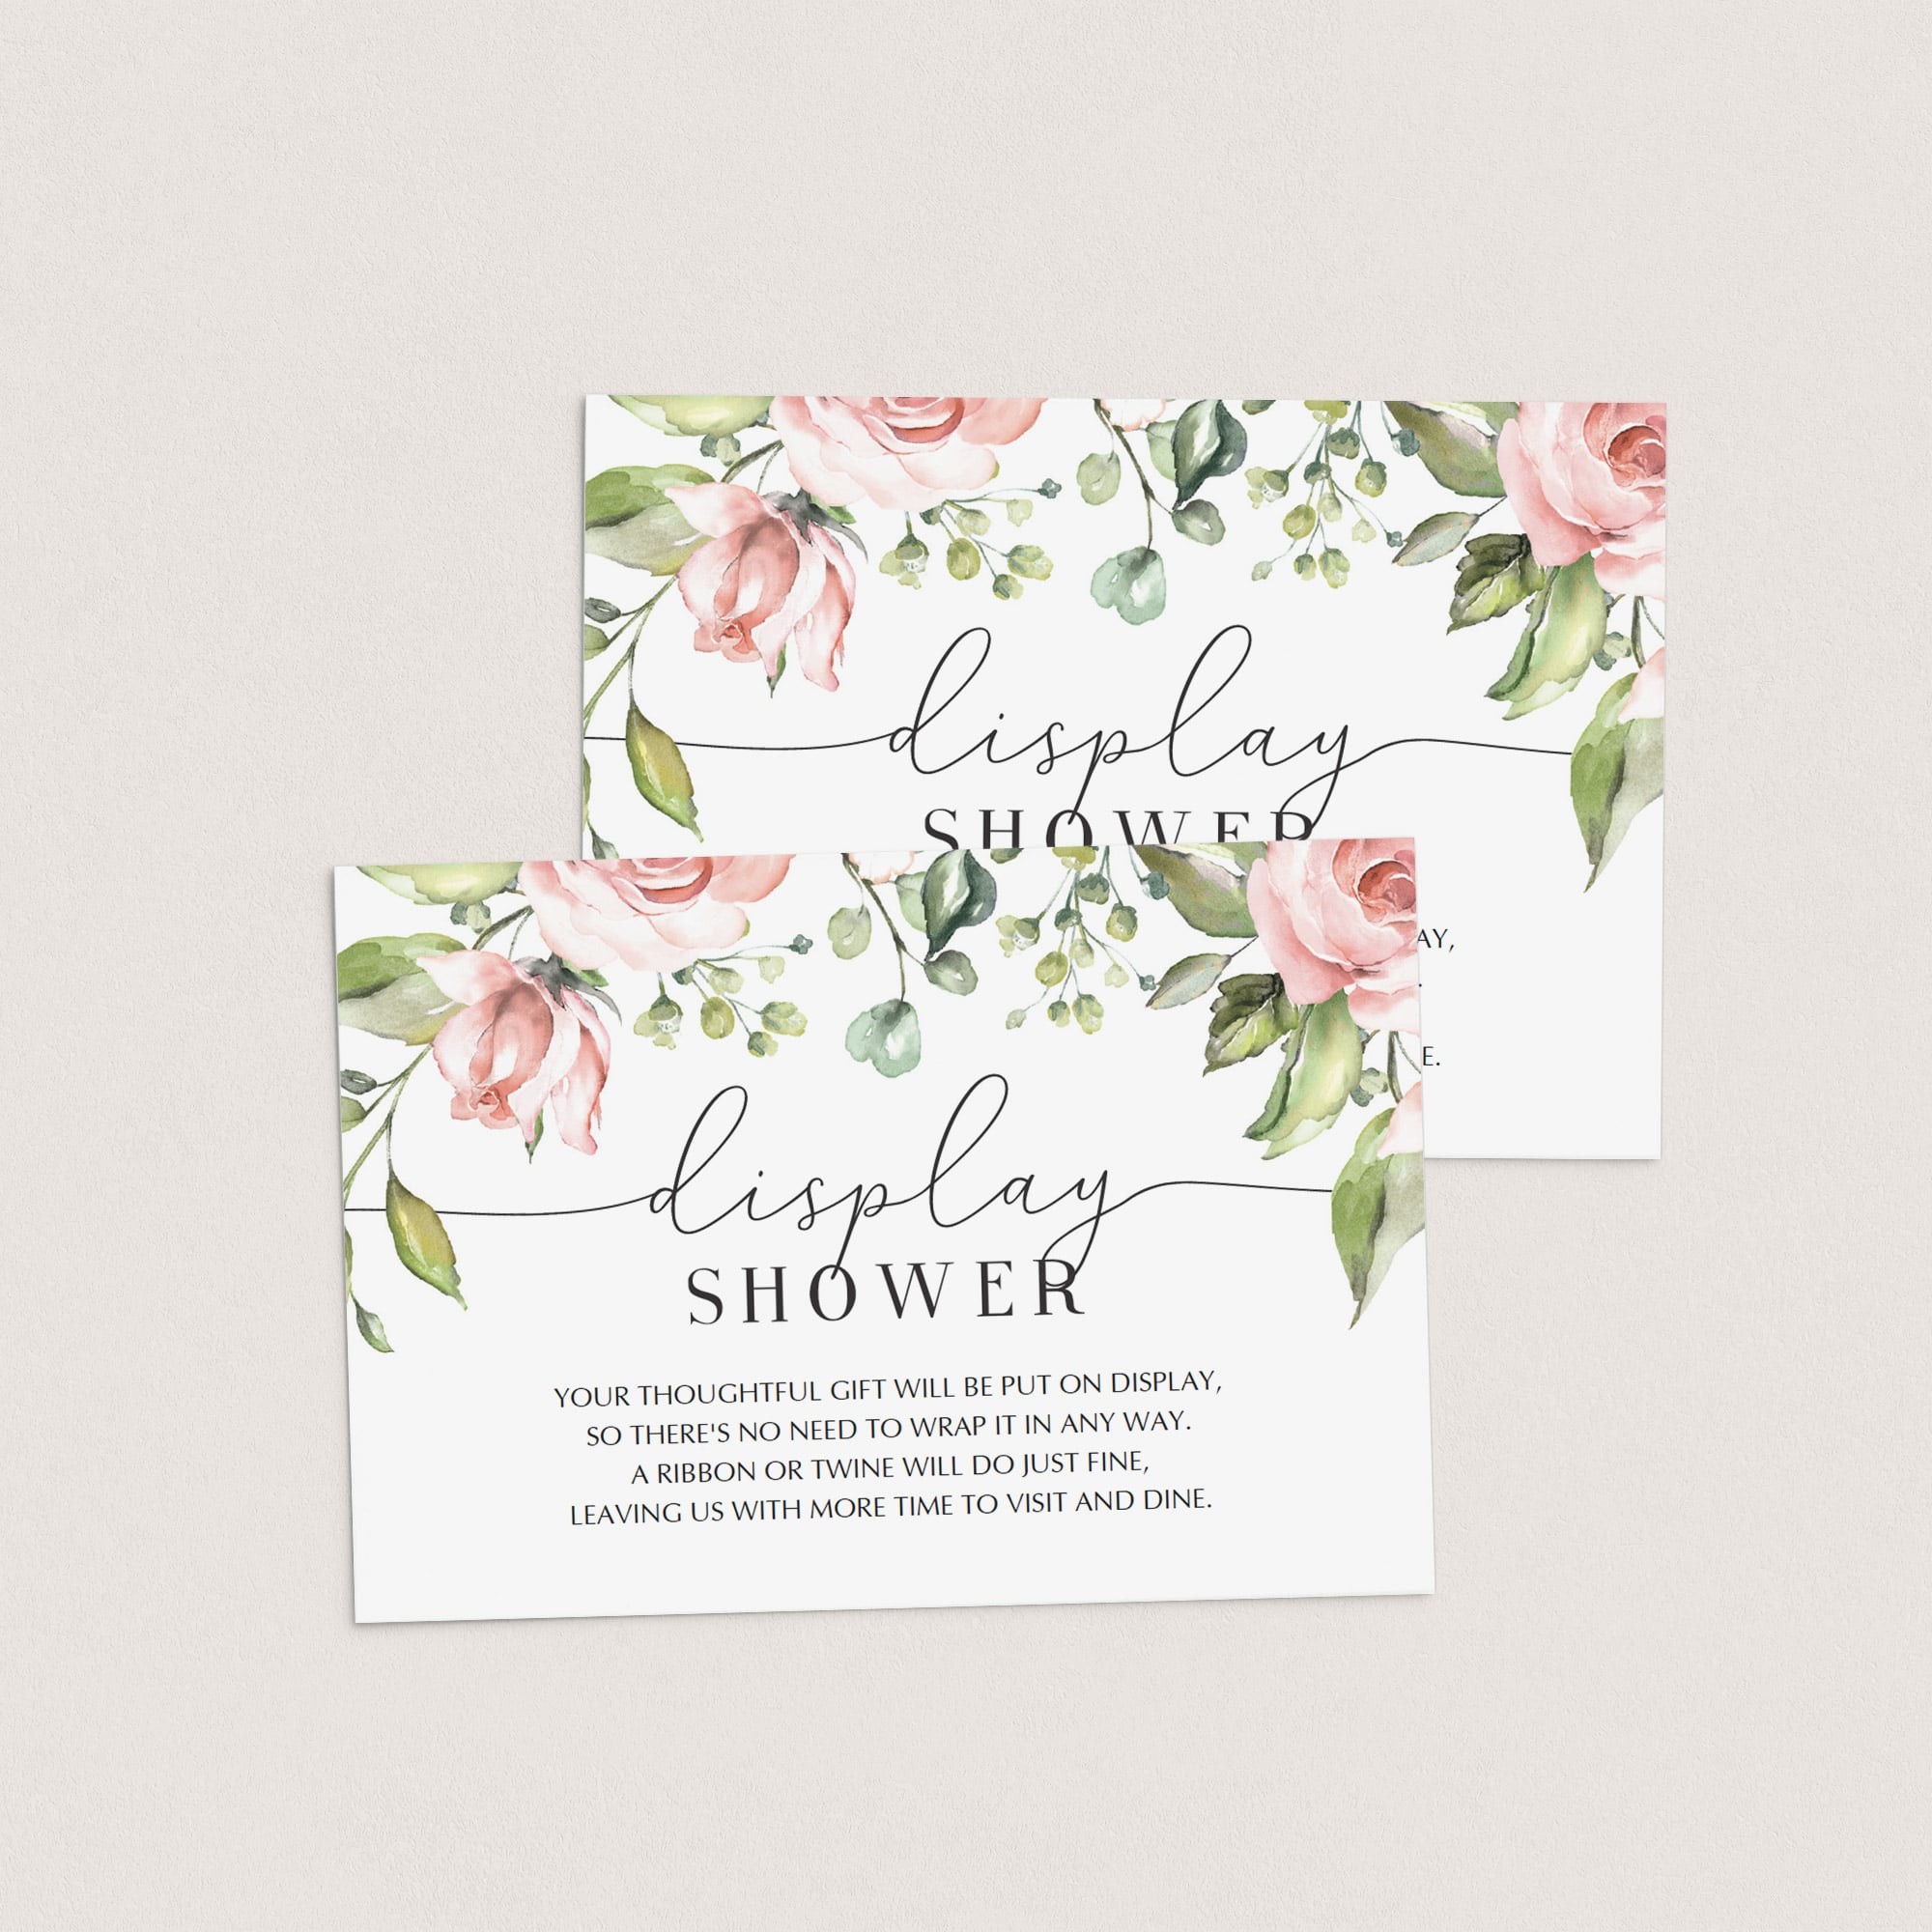 Floral display shower insert template by LittleSizzle